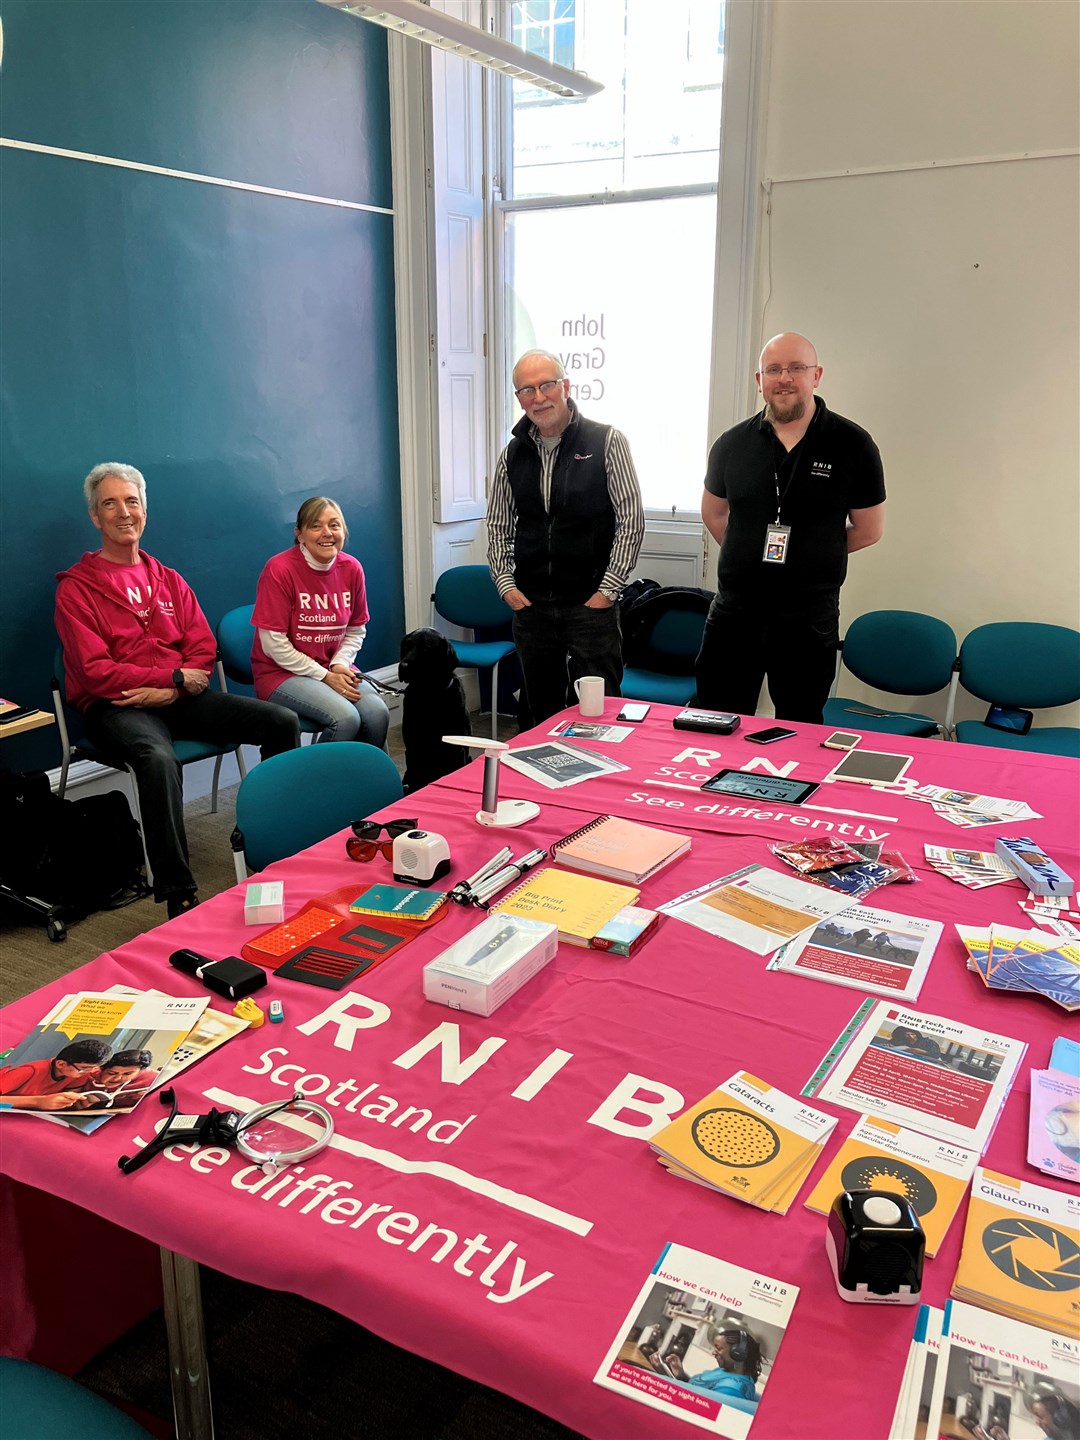 Pictured: Representatives from RNIB Scotland will offer their support at a series of free drop-in events.